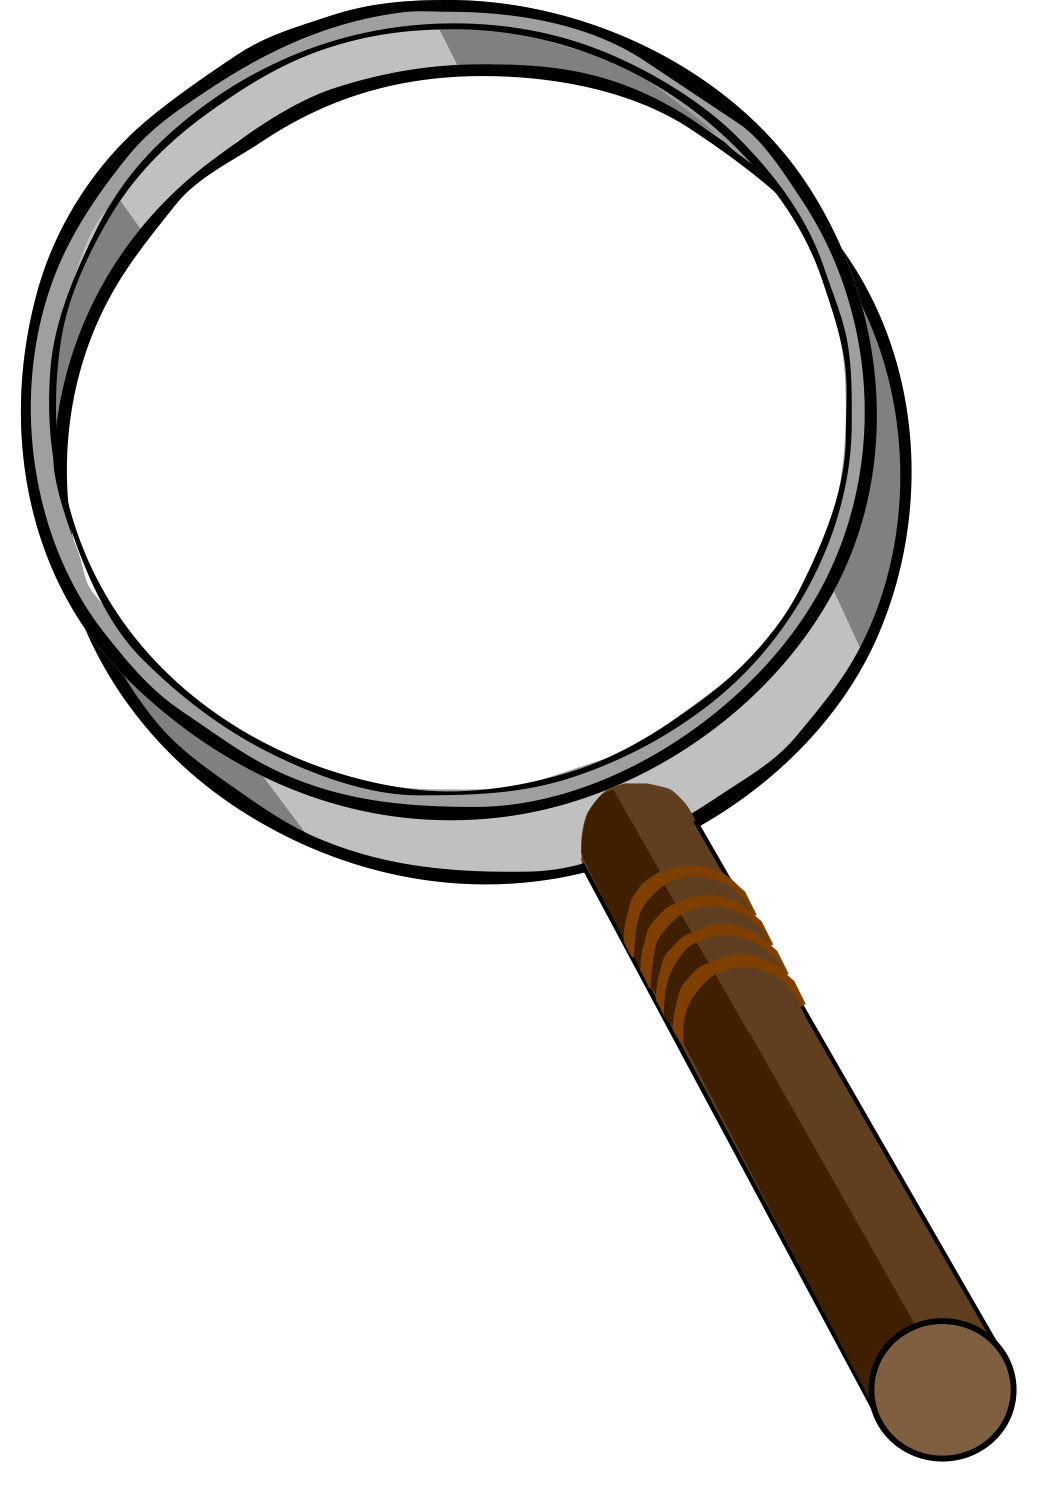 microsoft clipart magnifying glass - photo #17